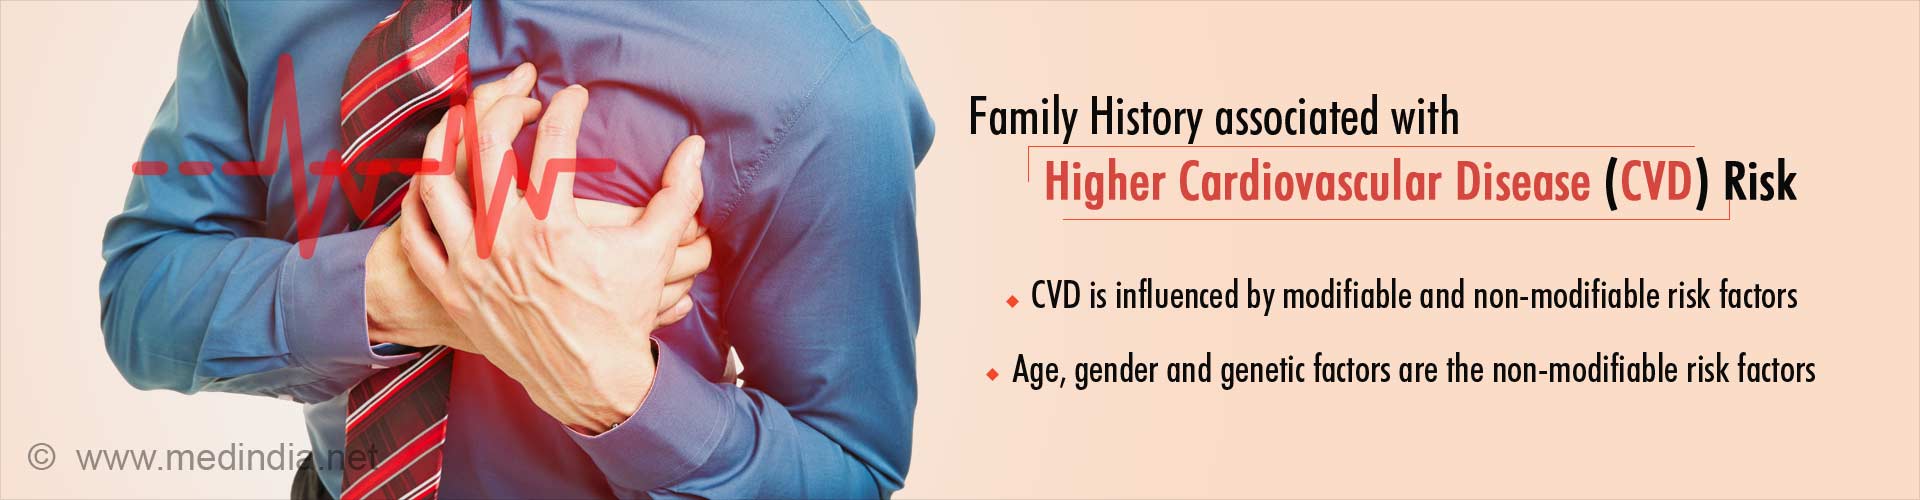 family history associated with higher cardiovascular disease (cvd) risk
- cvd is influenced by modifiable and non-modifiable risk factors
- age, gender and genetic factors are the non-modified risk factors